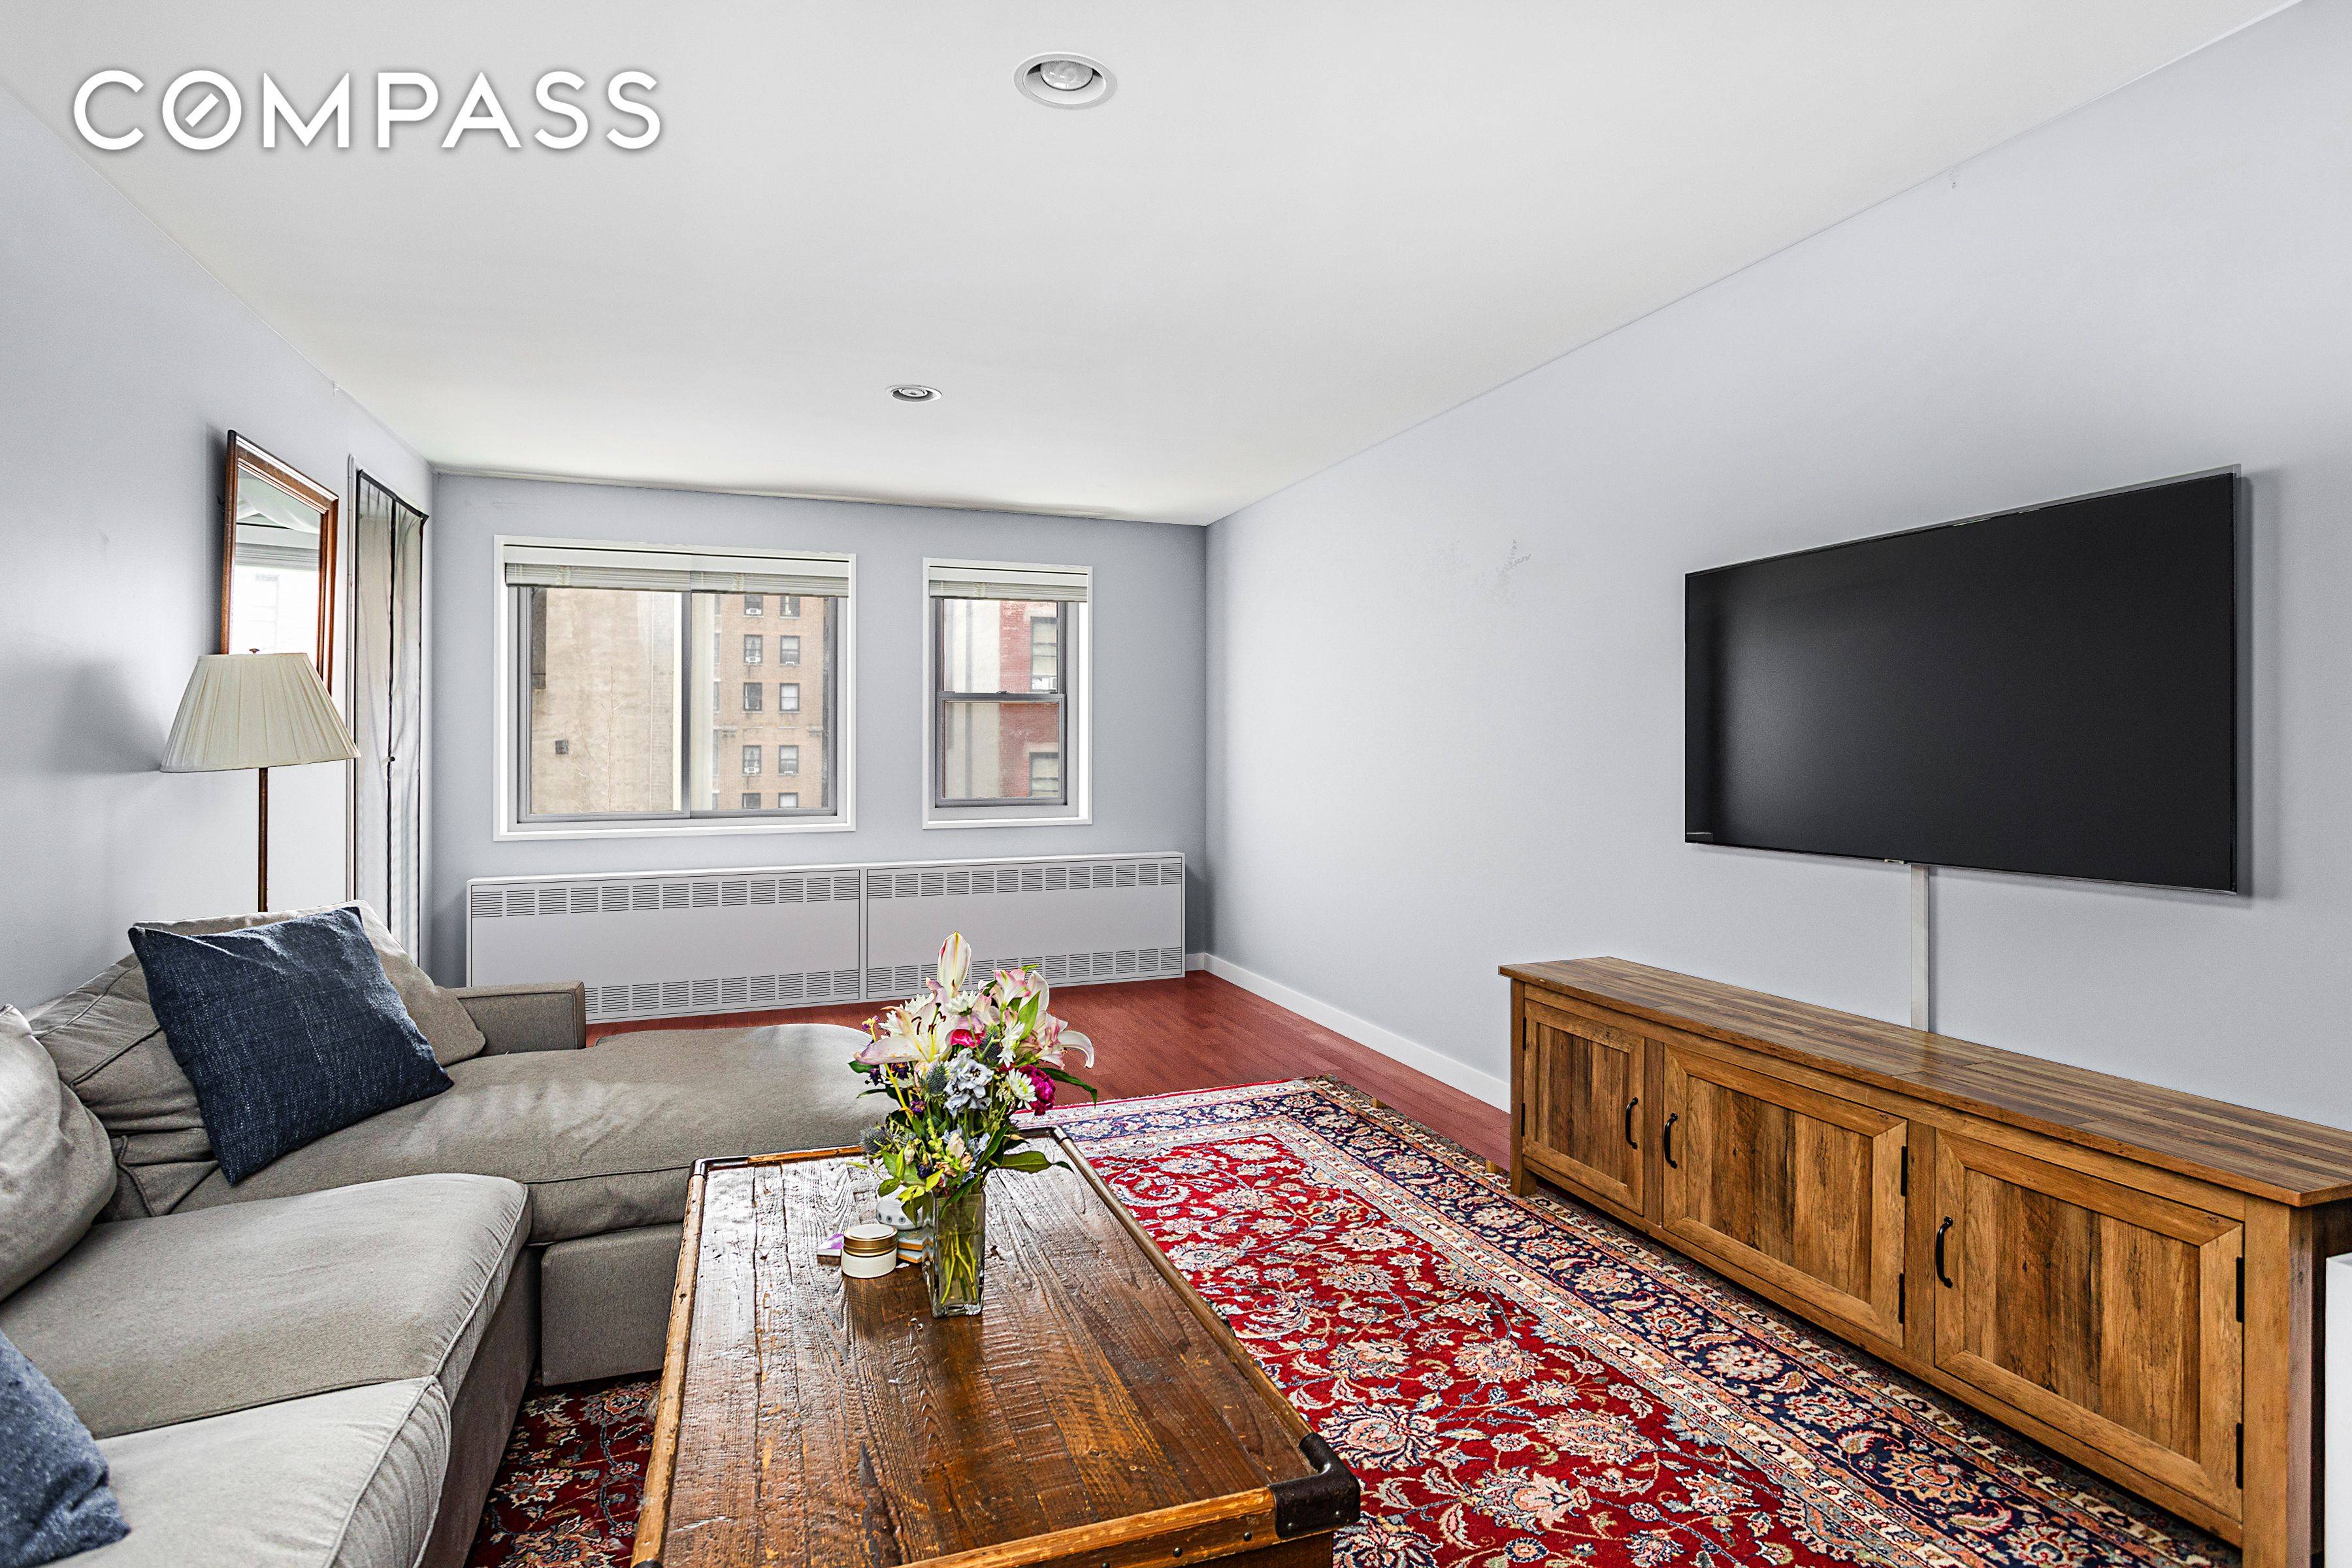 Welcome to your new home, in the heart of Manhattan's most exciting and vibrant neighborhood.